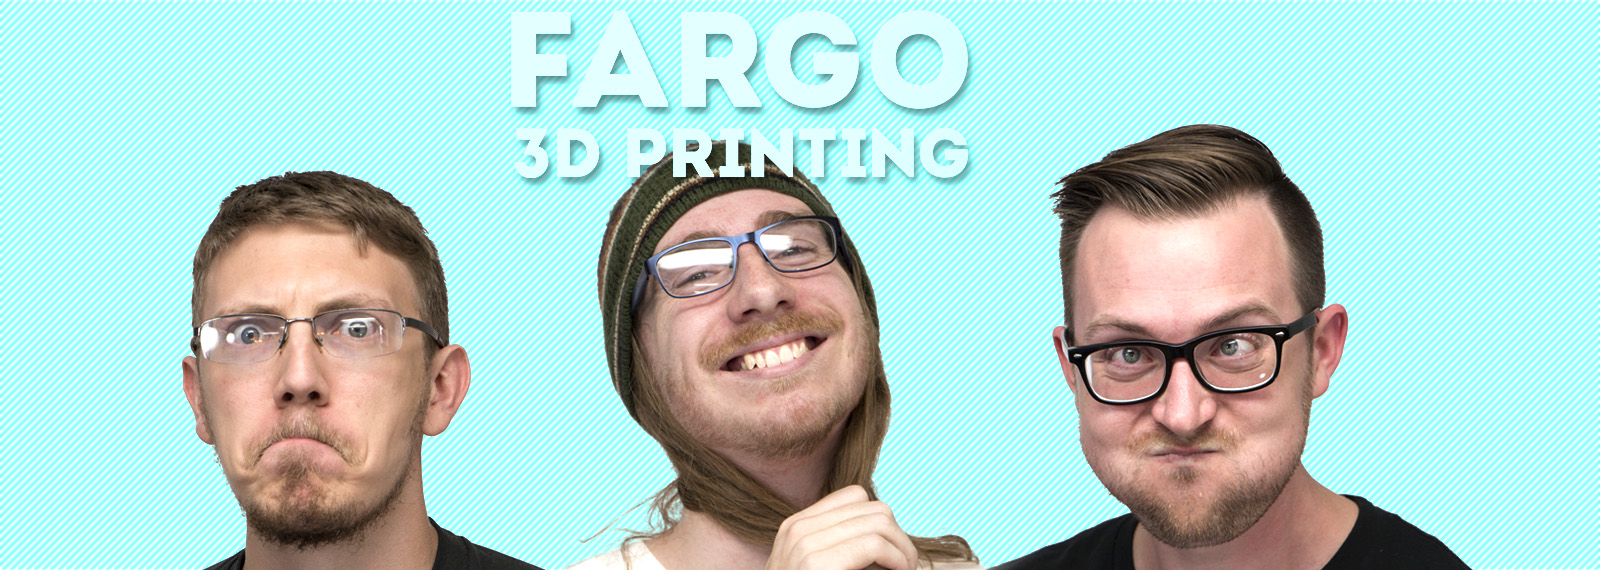 3D Printing Podcast - The Fargo 3D Printing Show